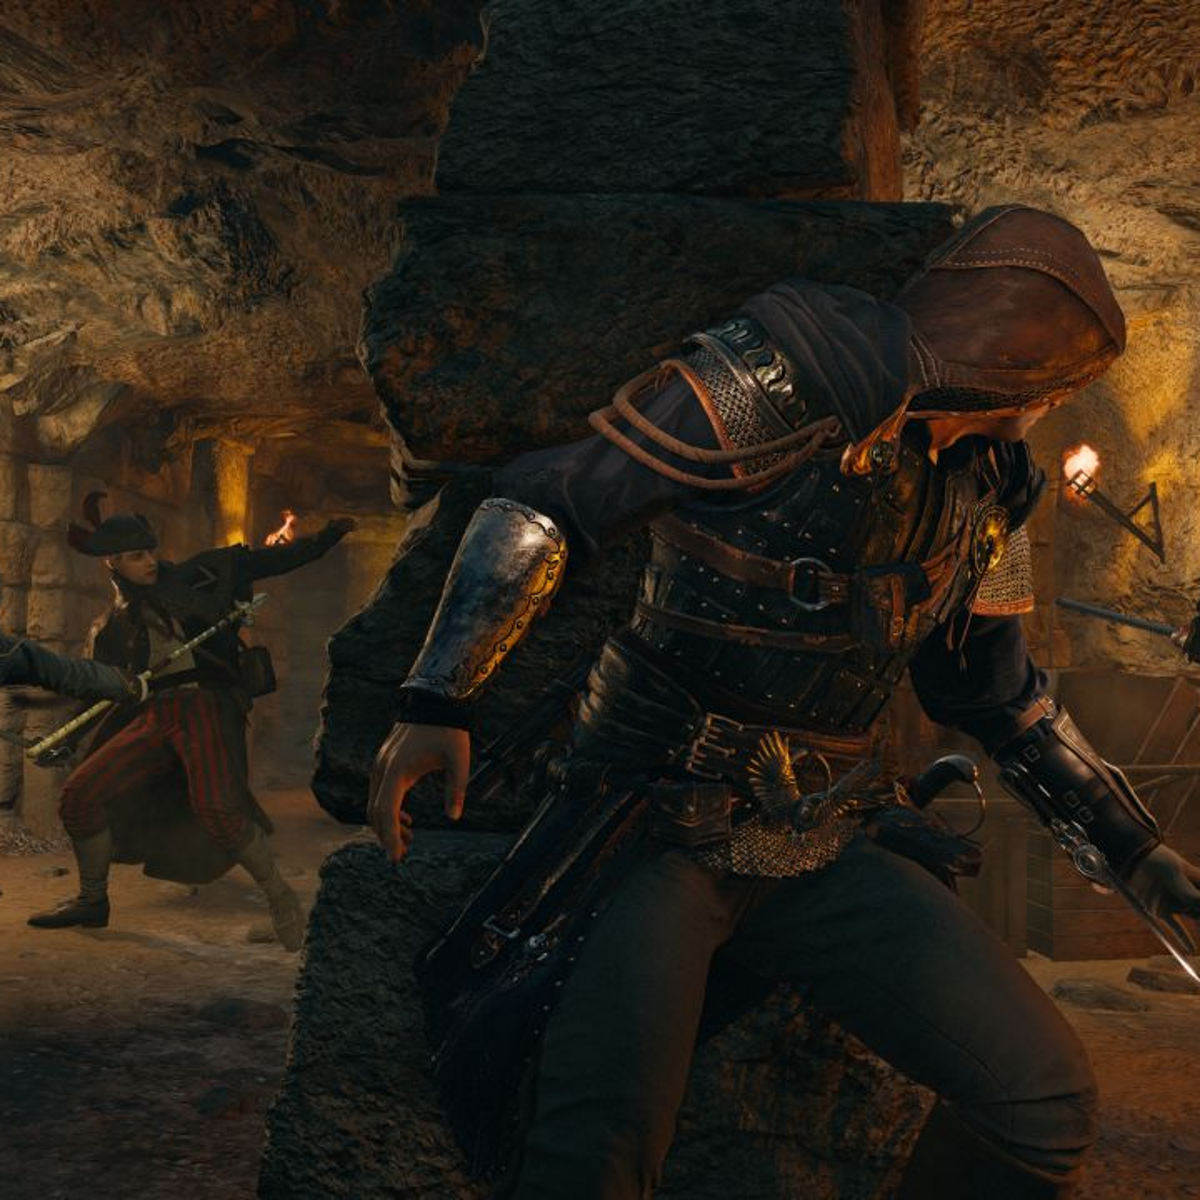 Assassin's Creed Unity: Altair, Ezio and Kenway return in new Rift mode |  VG247